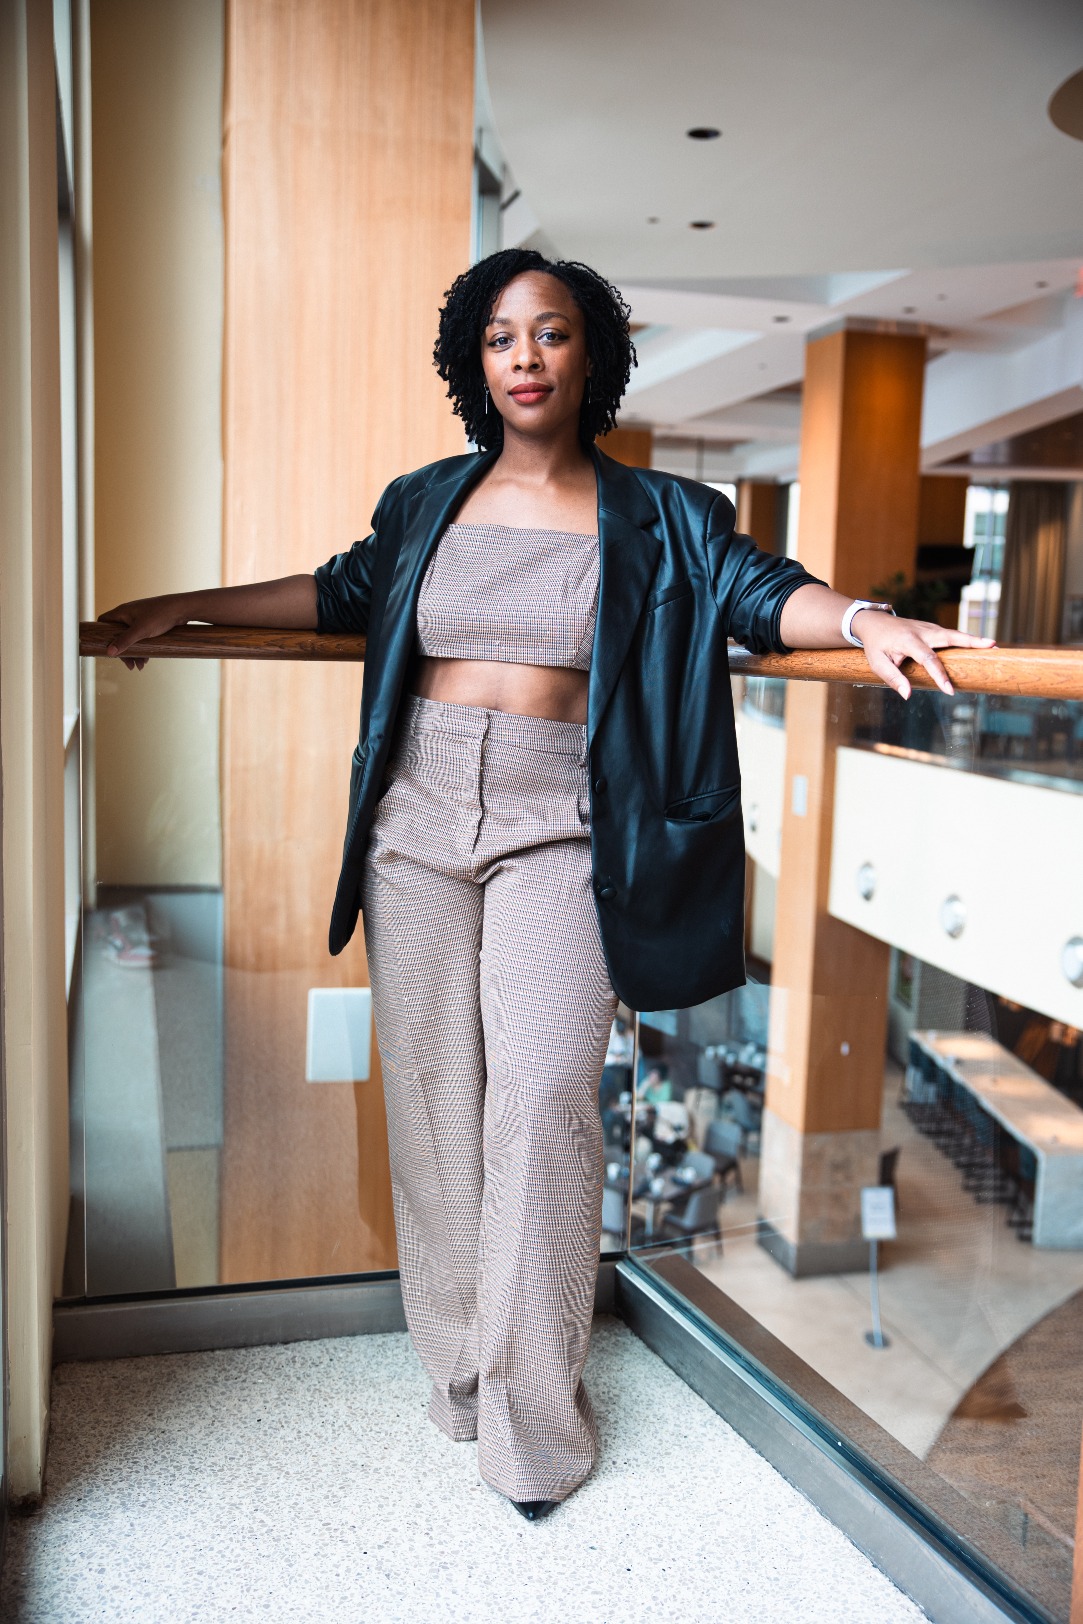 This is a picture of Latesha Lynch, the host of the podcast, leaning against a banister in a power pose with a leather blazer, trousers, and matching cropped top.